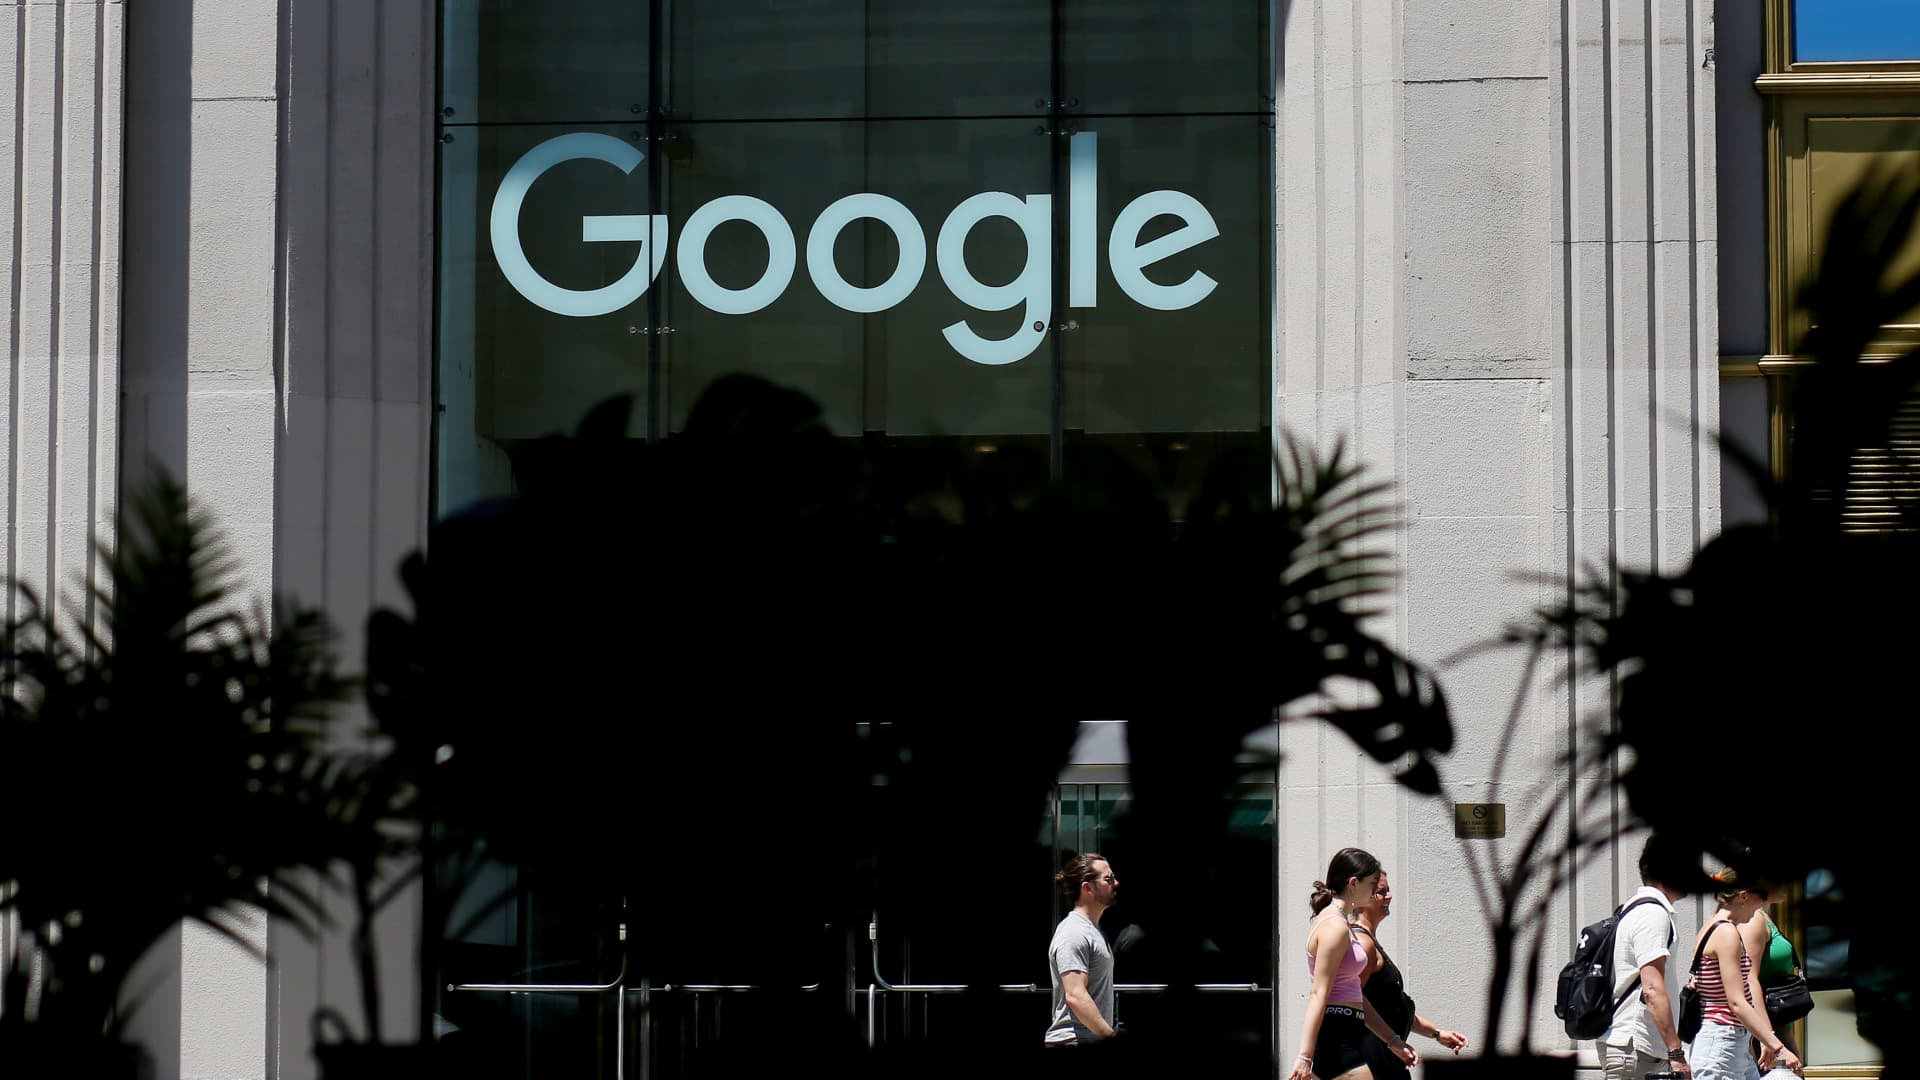 Google stacks its legal team with former DOJ employees as it faces antitrust cases